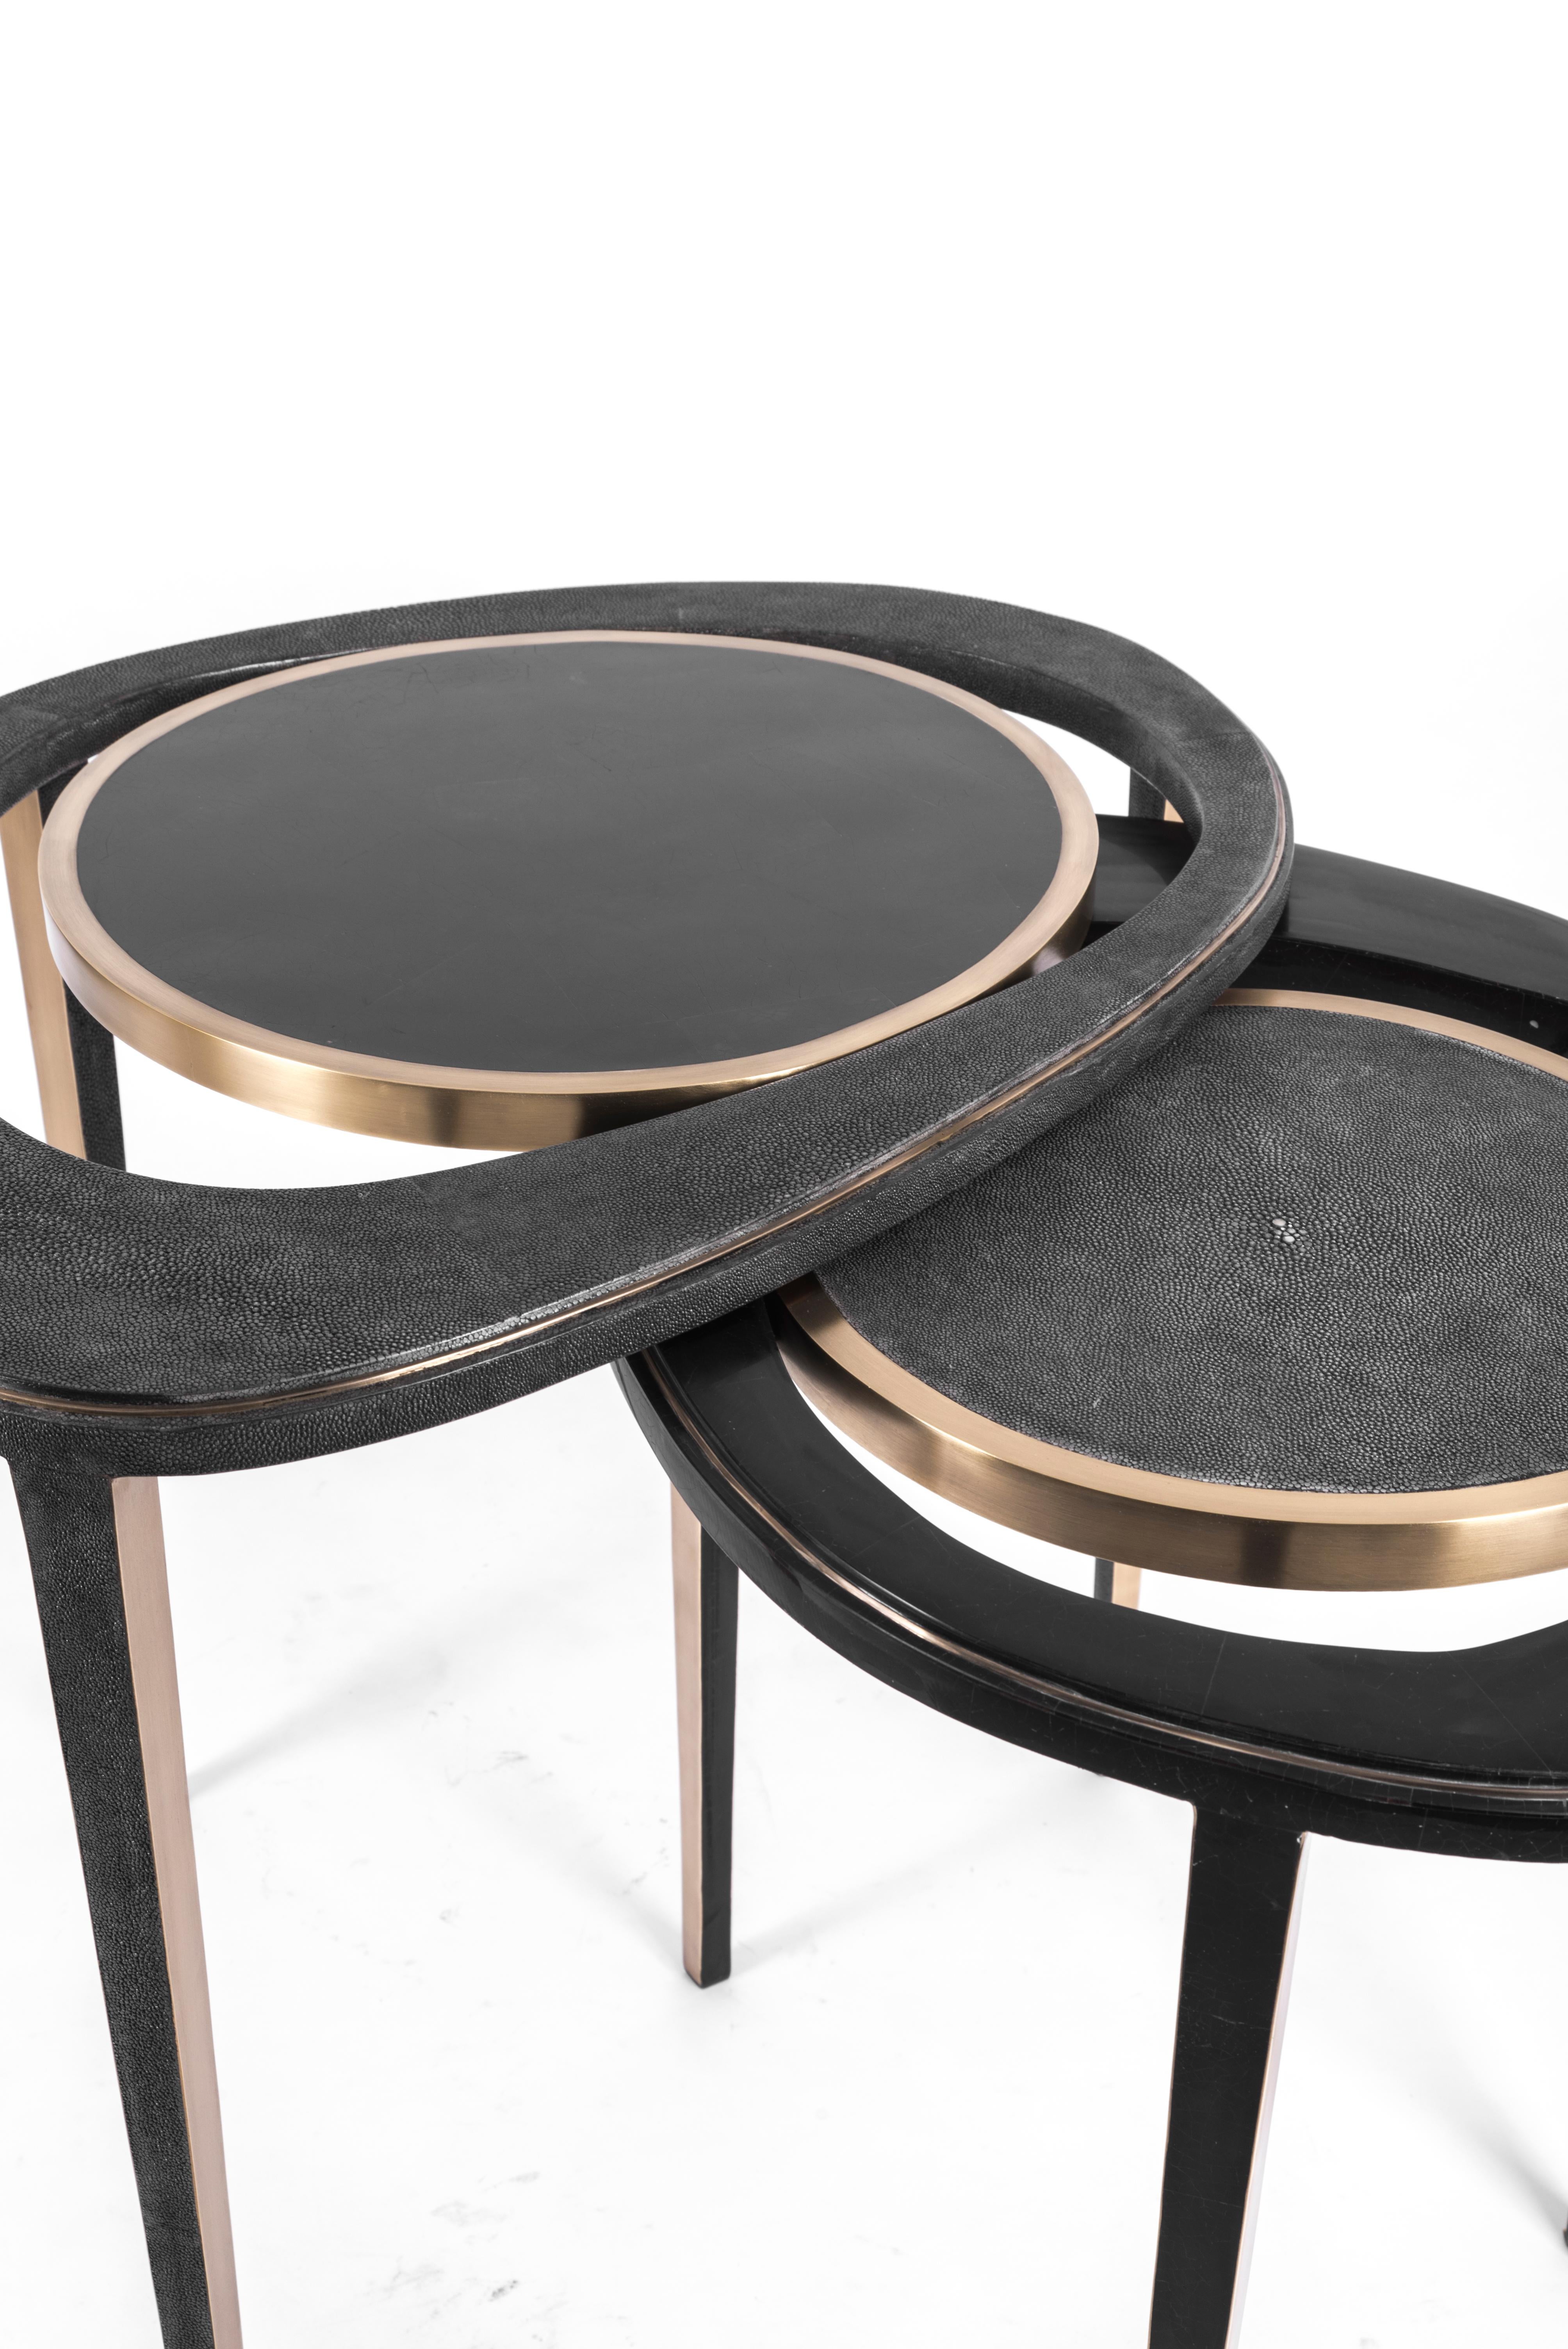 The set of 2 peacock nesting side tables are an iconic R&Y Augousti piece and one of their first designs. The piece is Minimalist and sculptural, with inspiration of course from the shape of exotic peacock feathers. The piece is inlaid in a mixture